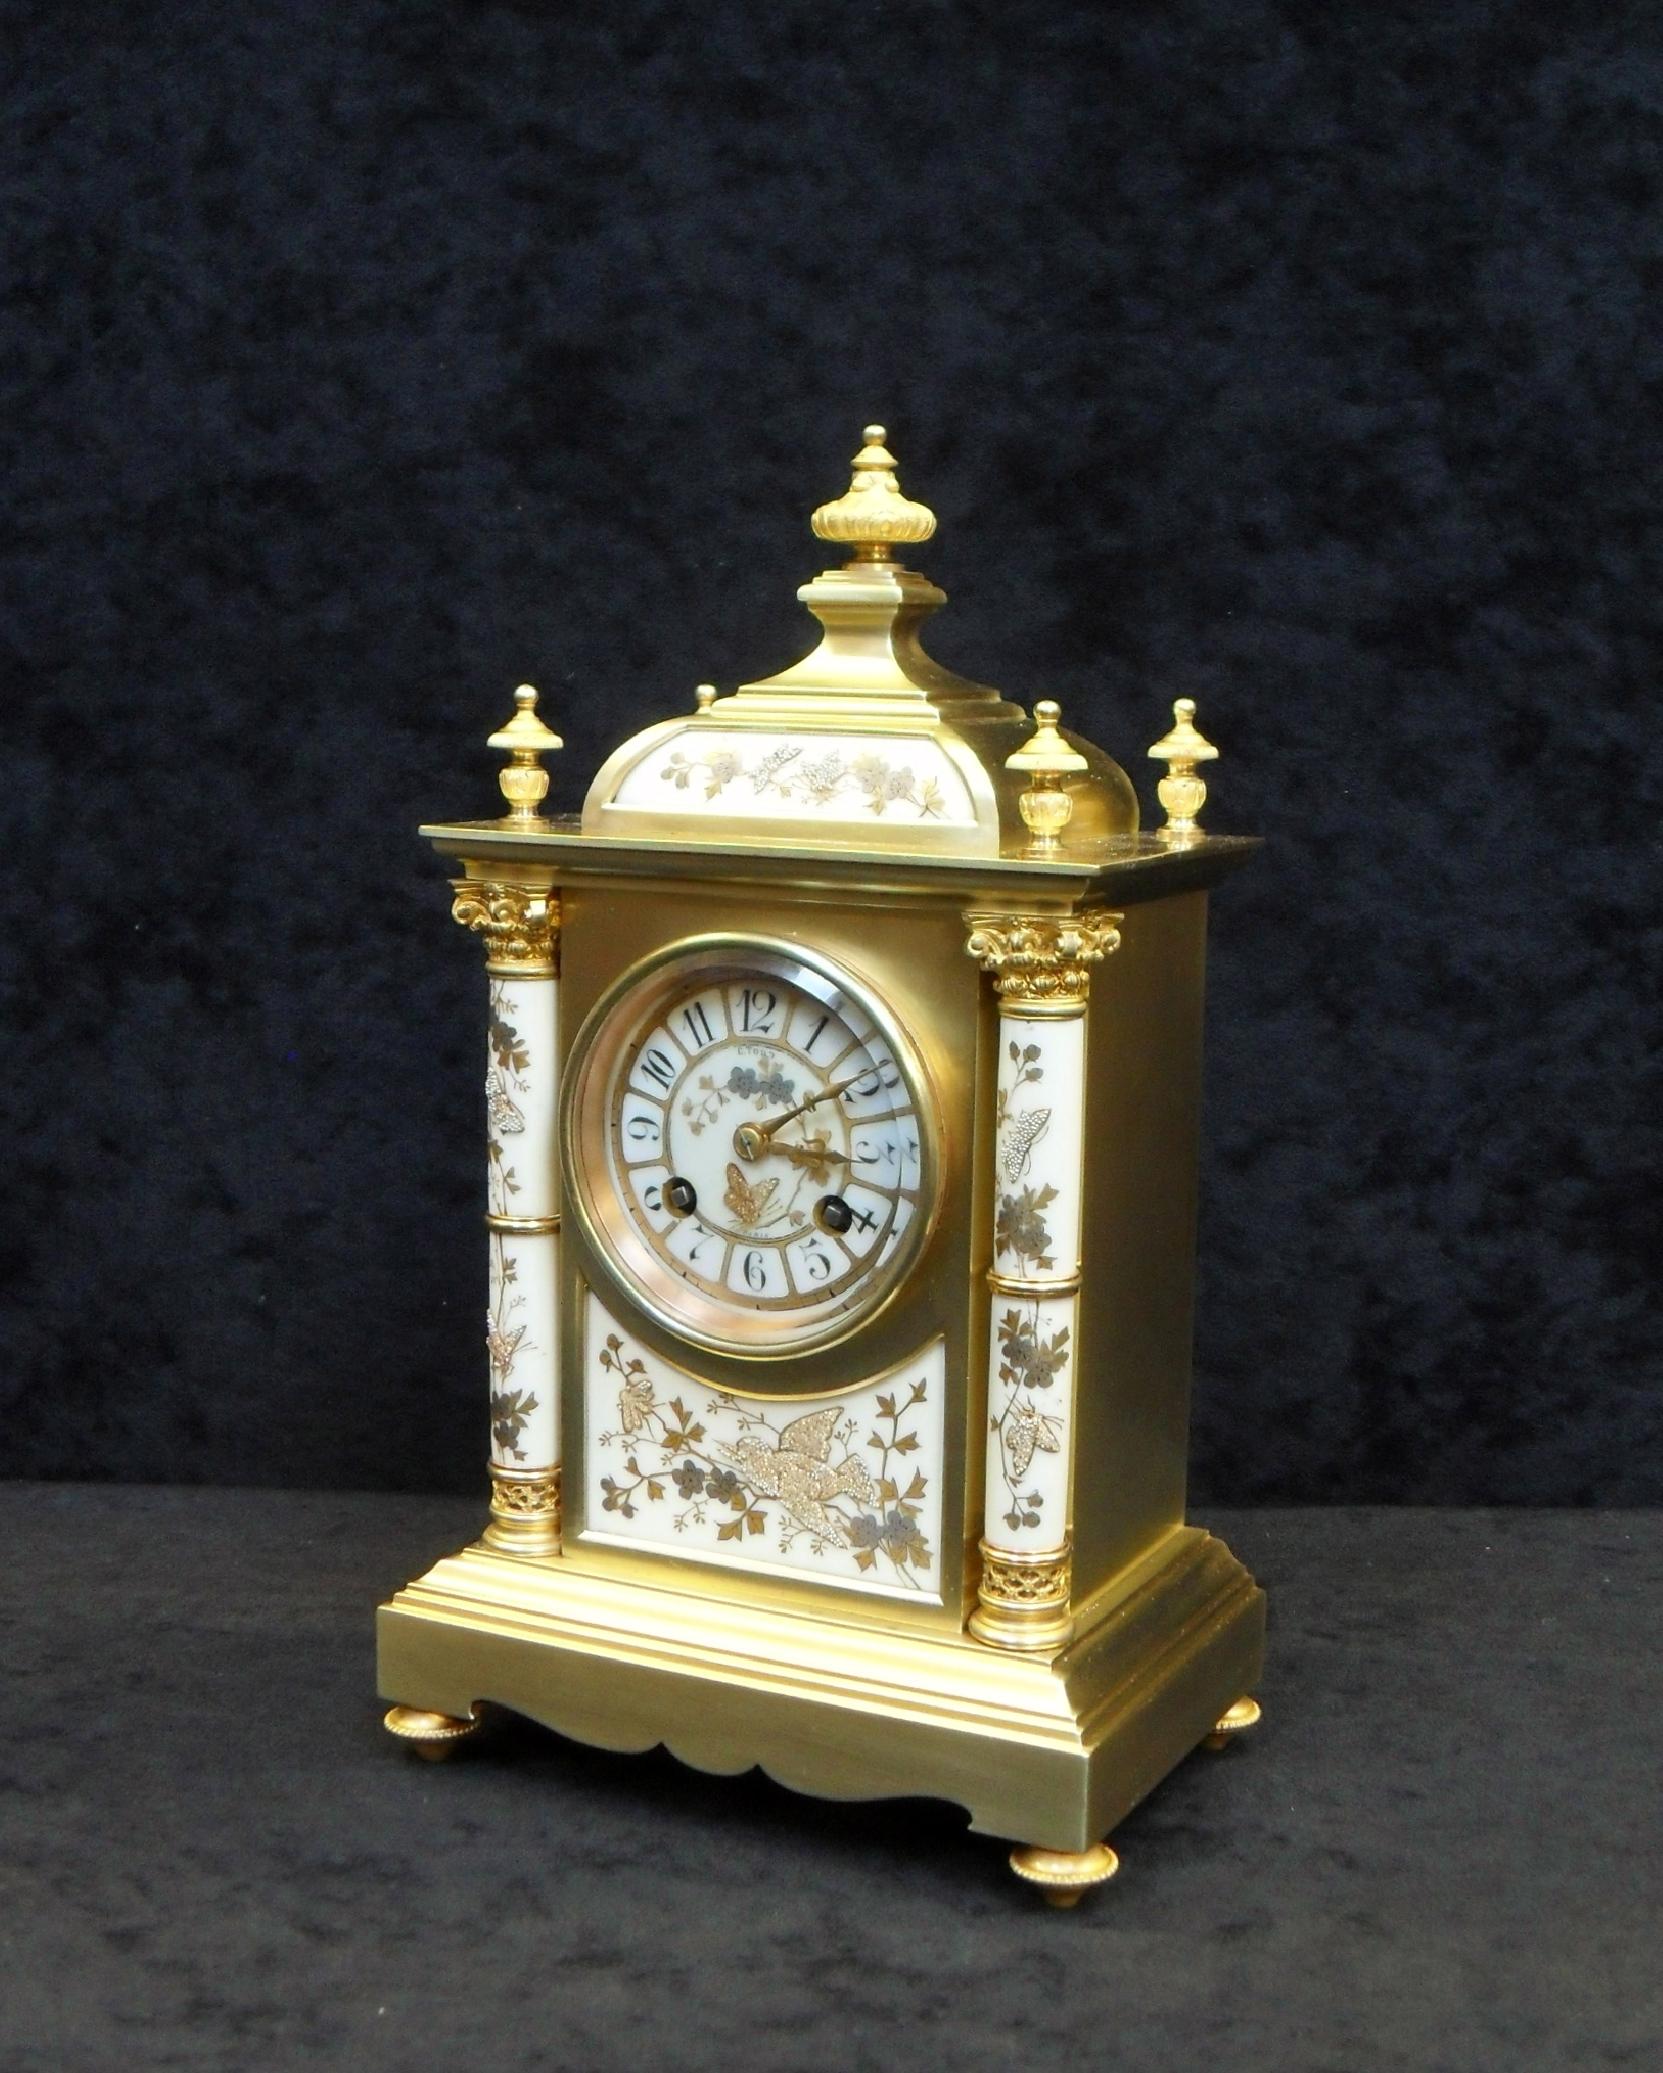 A decorative French Belle Époque brass mantel clock with inset porcelain panels, dial and columns finished with brass capitals and finials to the top. The porcelain has a hand painted silver and gilt floral leaf design with bird and butterfly glass